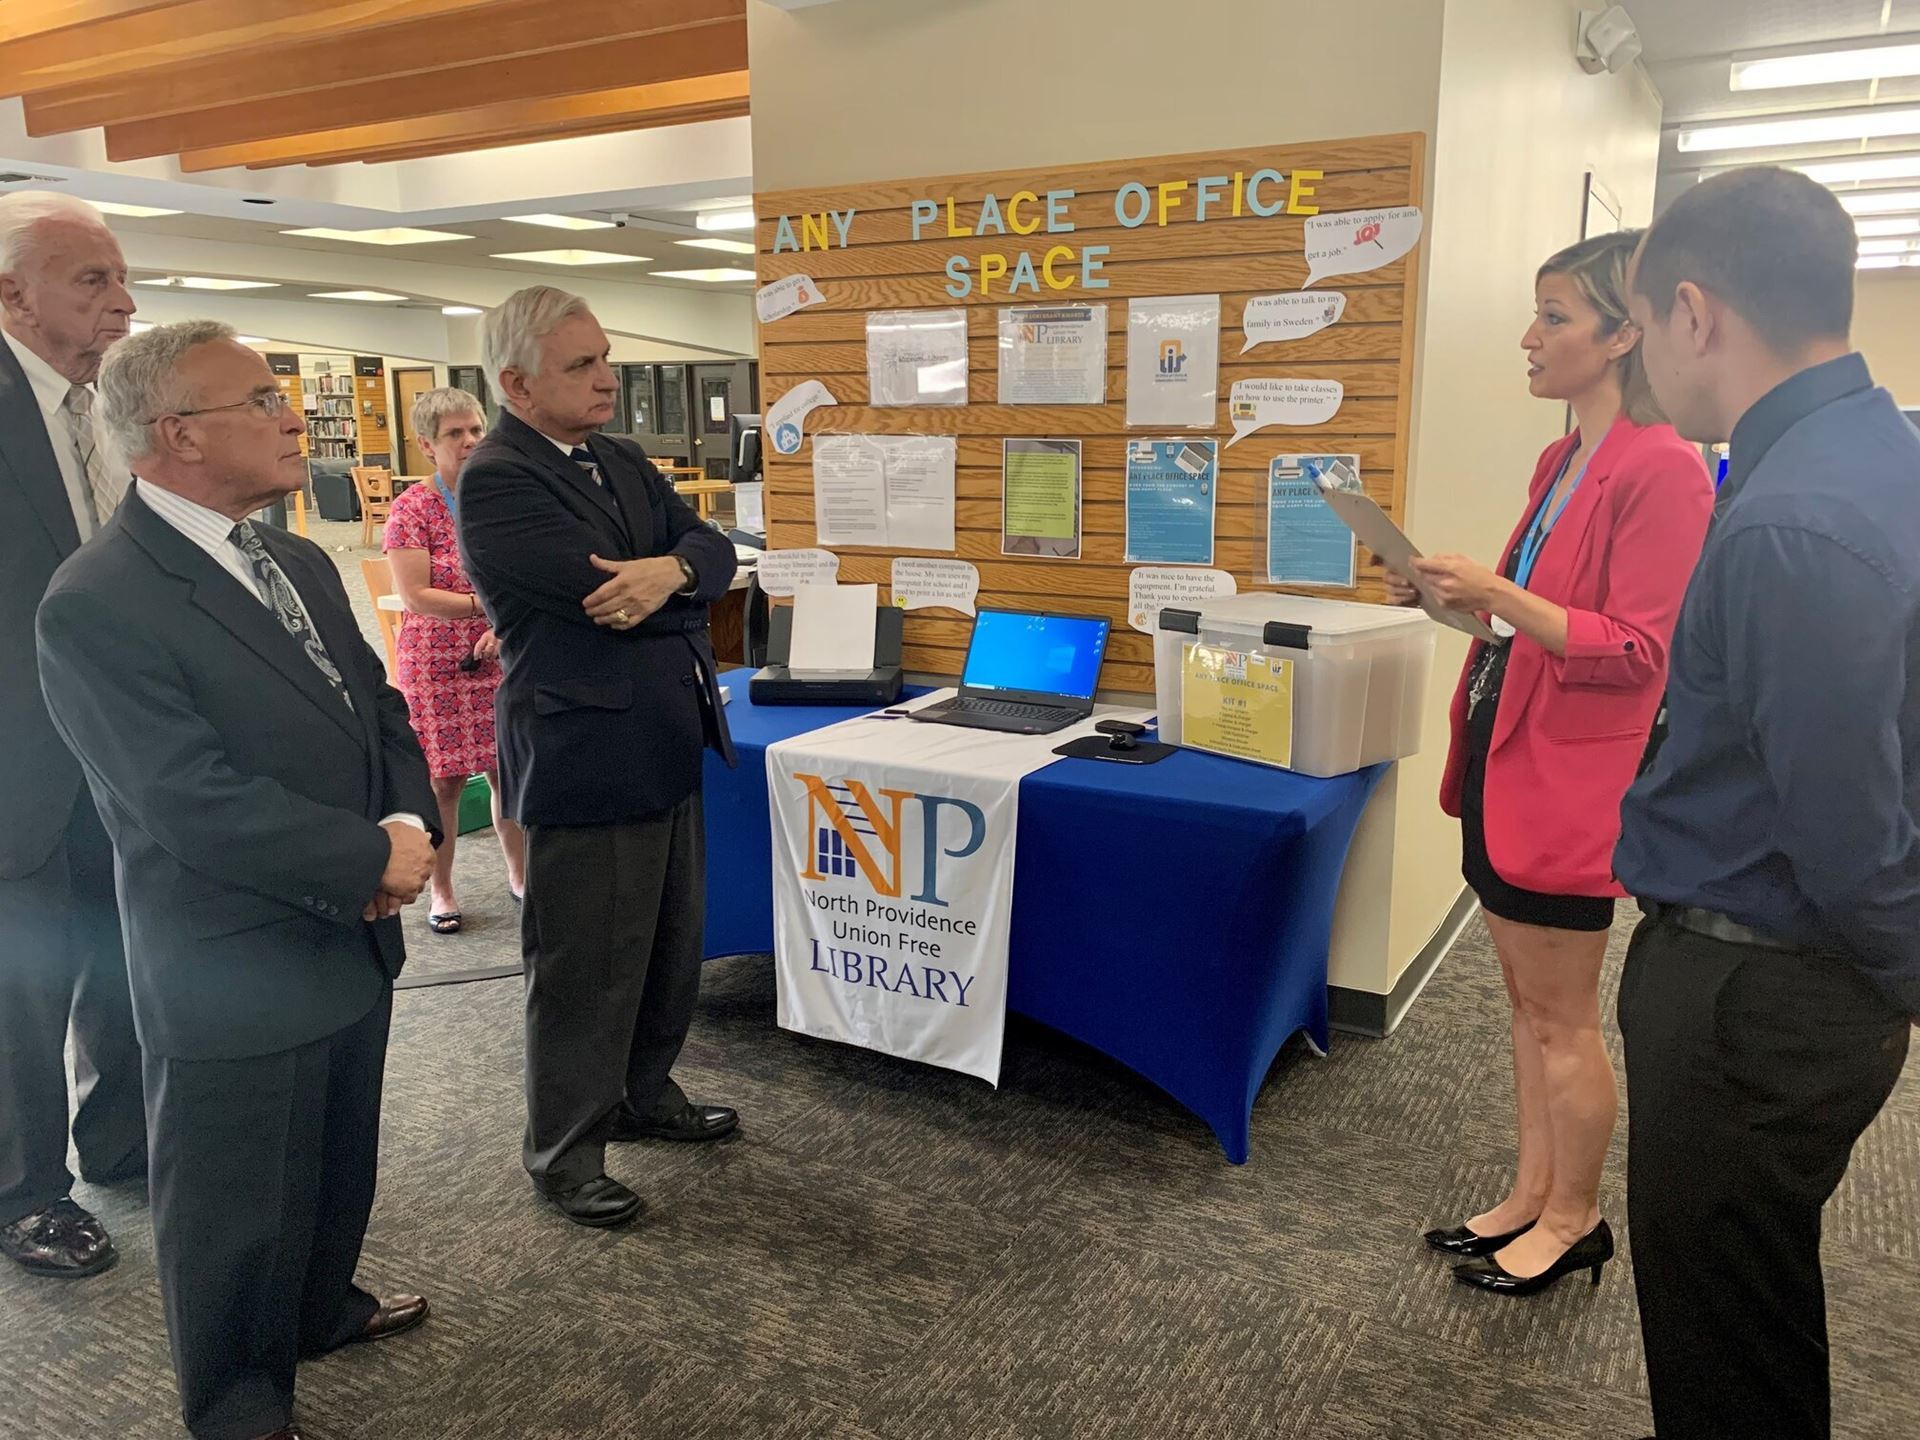 Senator Jack Reed standing in the North Providence Union Free Library speaking with director Stef Blankenship about their "Any Space Office Place" project.